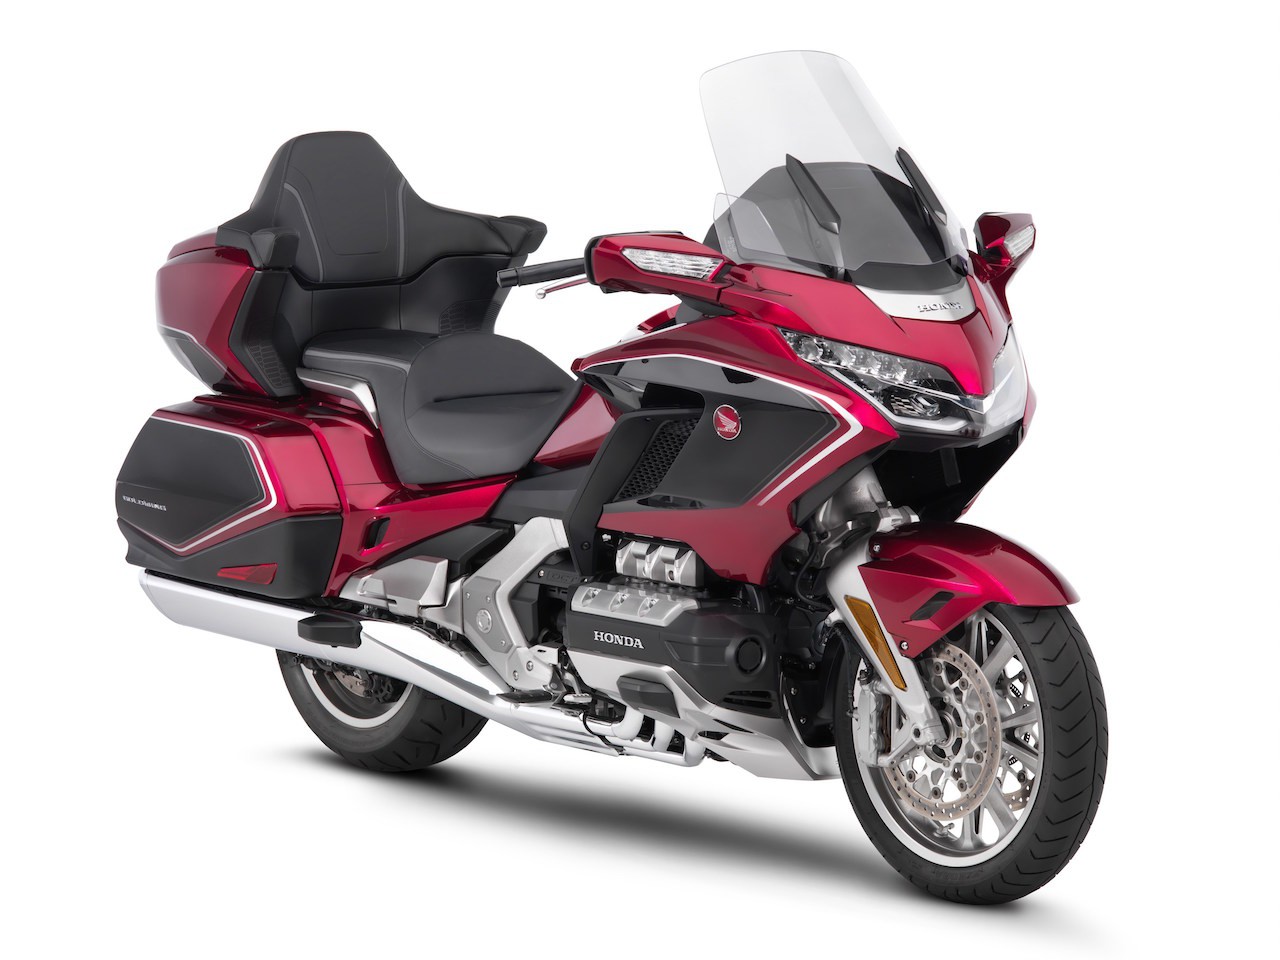 2018 Honda Gold Wing Price Announced | DriveMag Riders